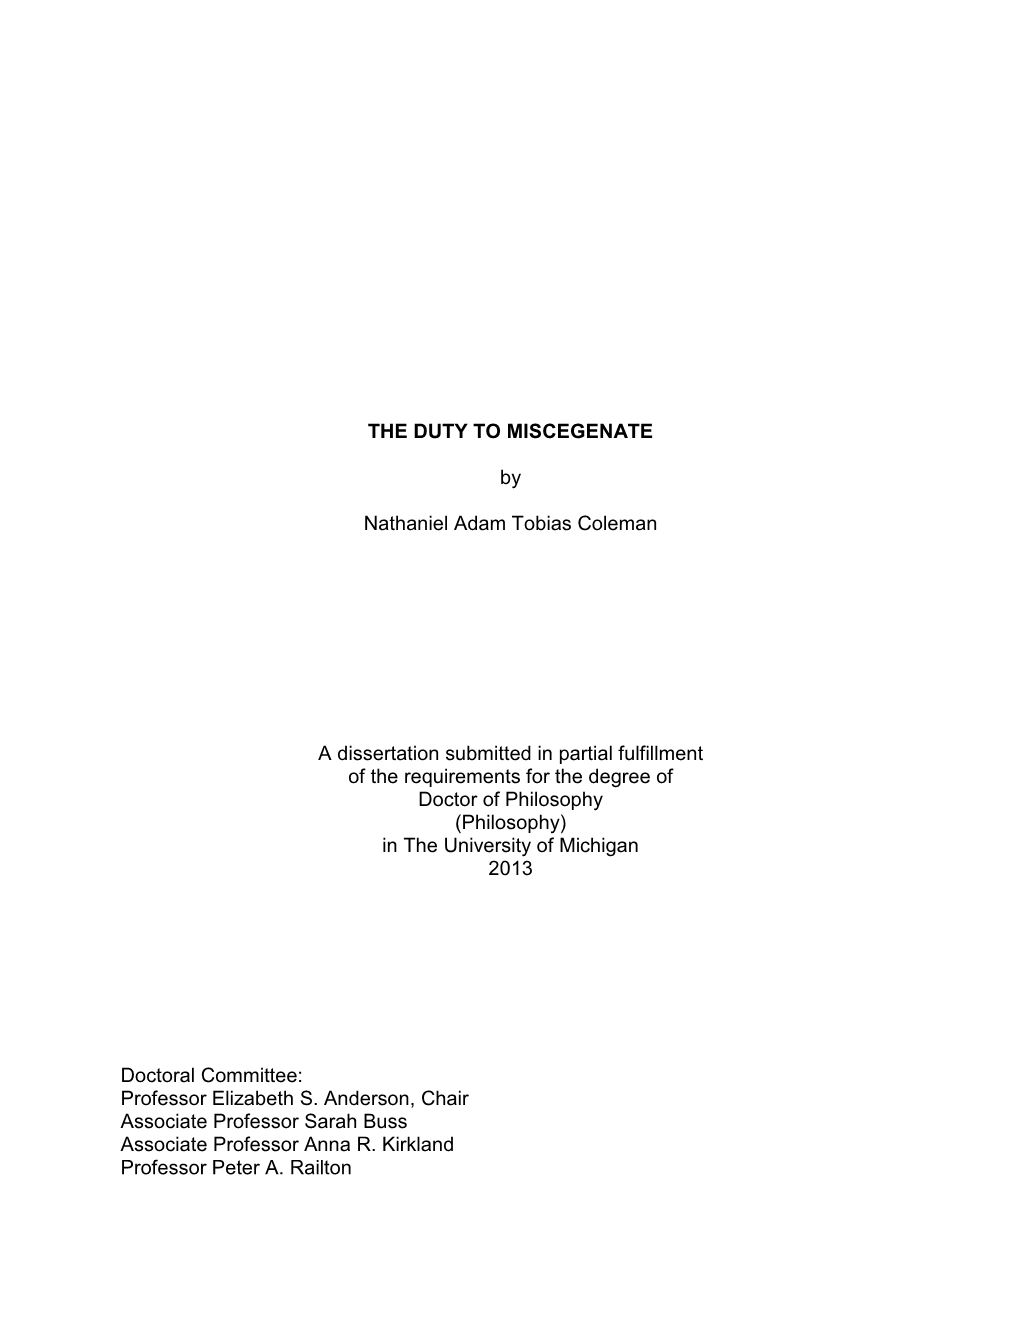 THE DUTY to MISCEGENATE by Nathaniel Adam Tobias Coleman A